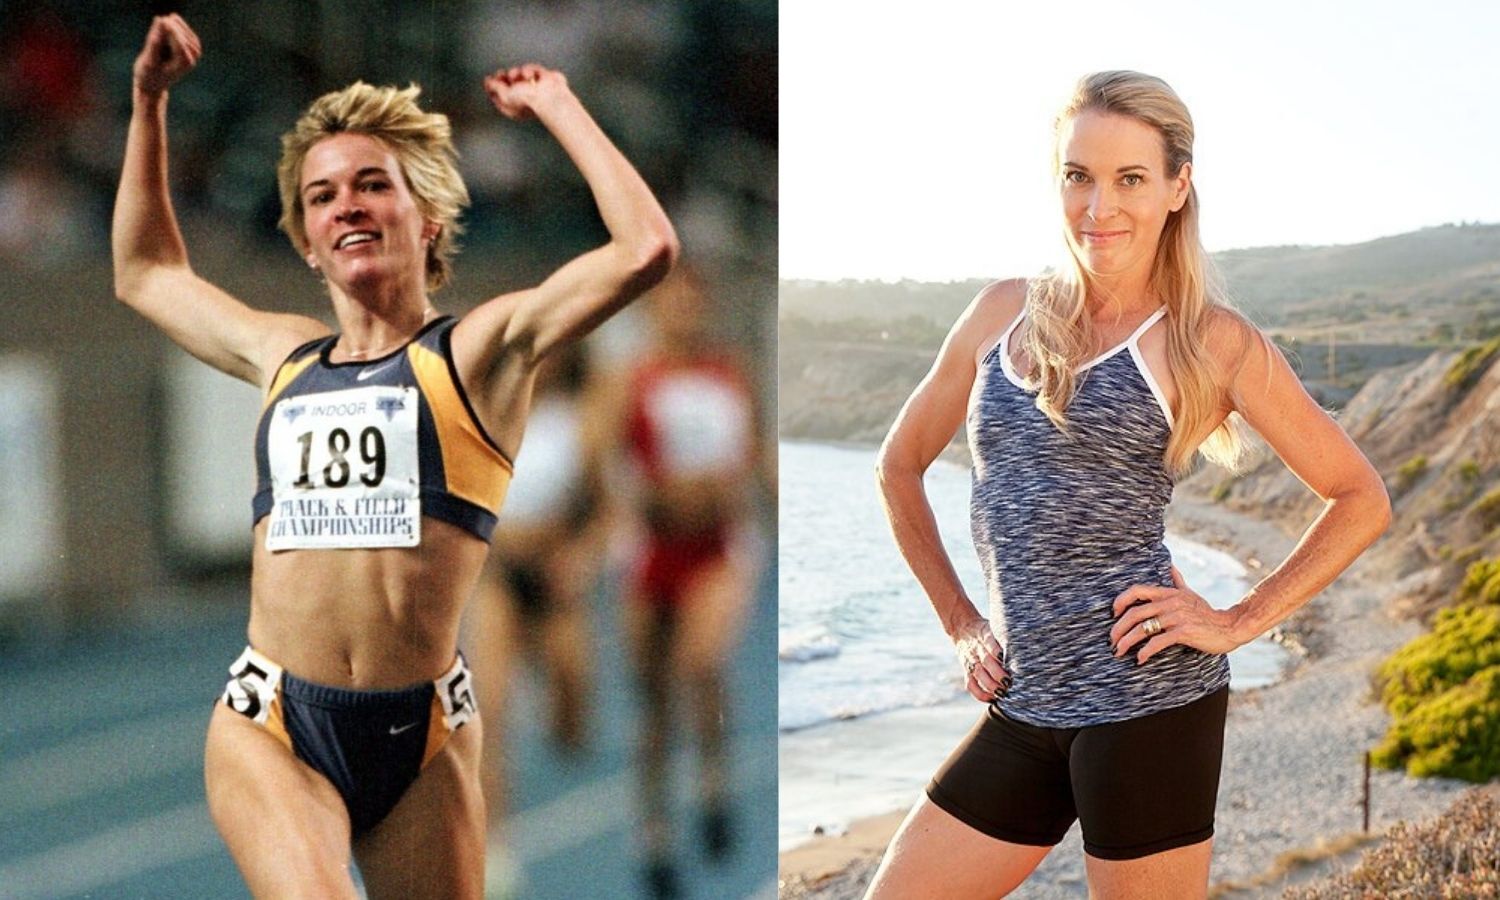 Suzy Hamilton — The story of an Olympics runner who resorted to prostitution picture